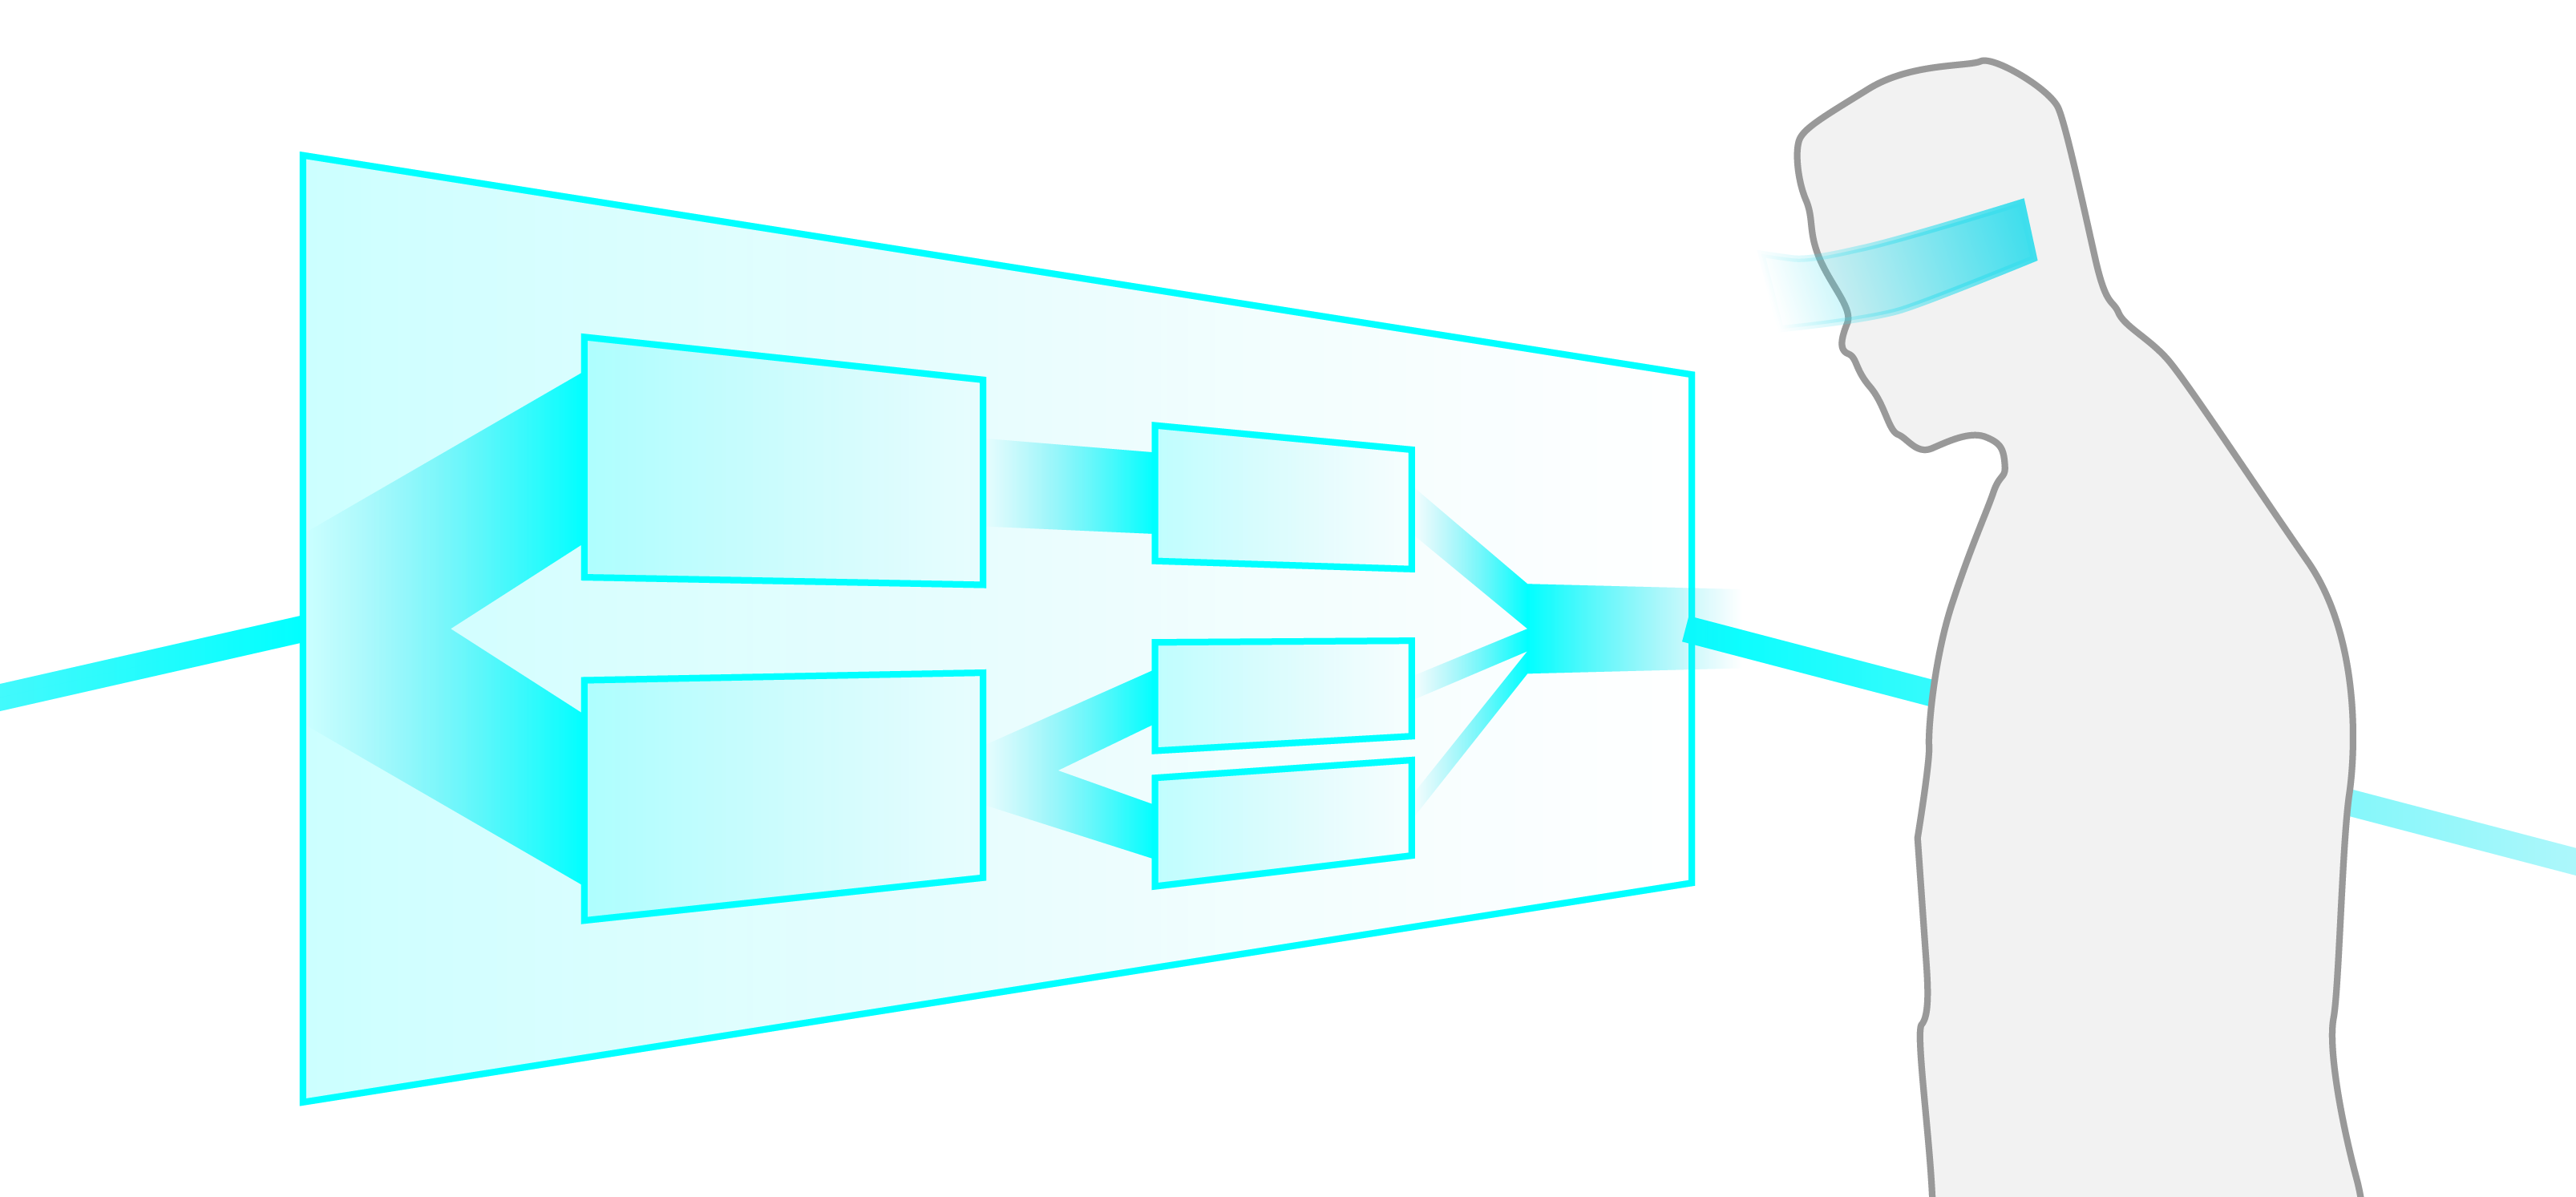 Example illustration of an AR application using the Filter/Flow model